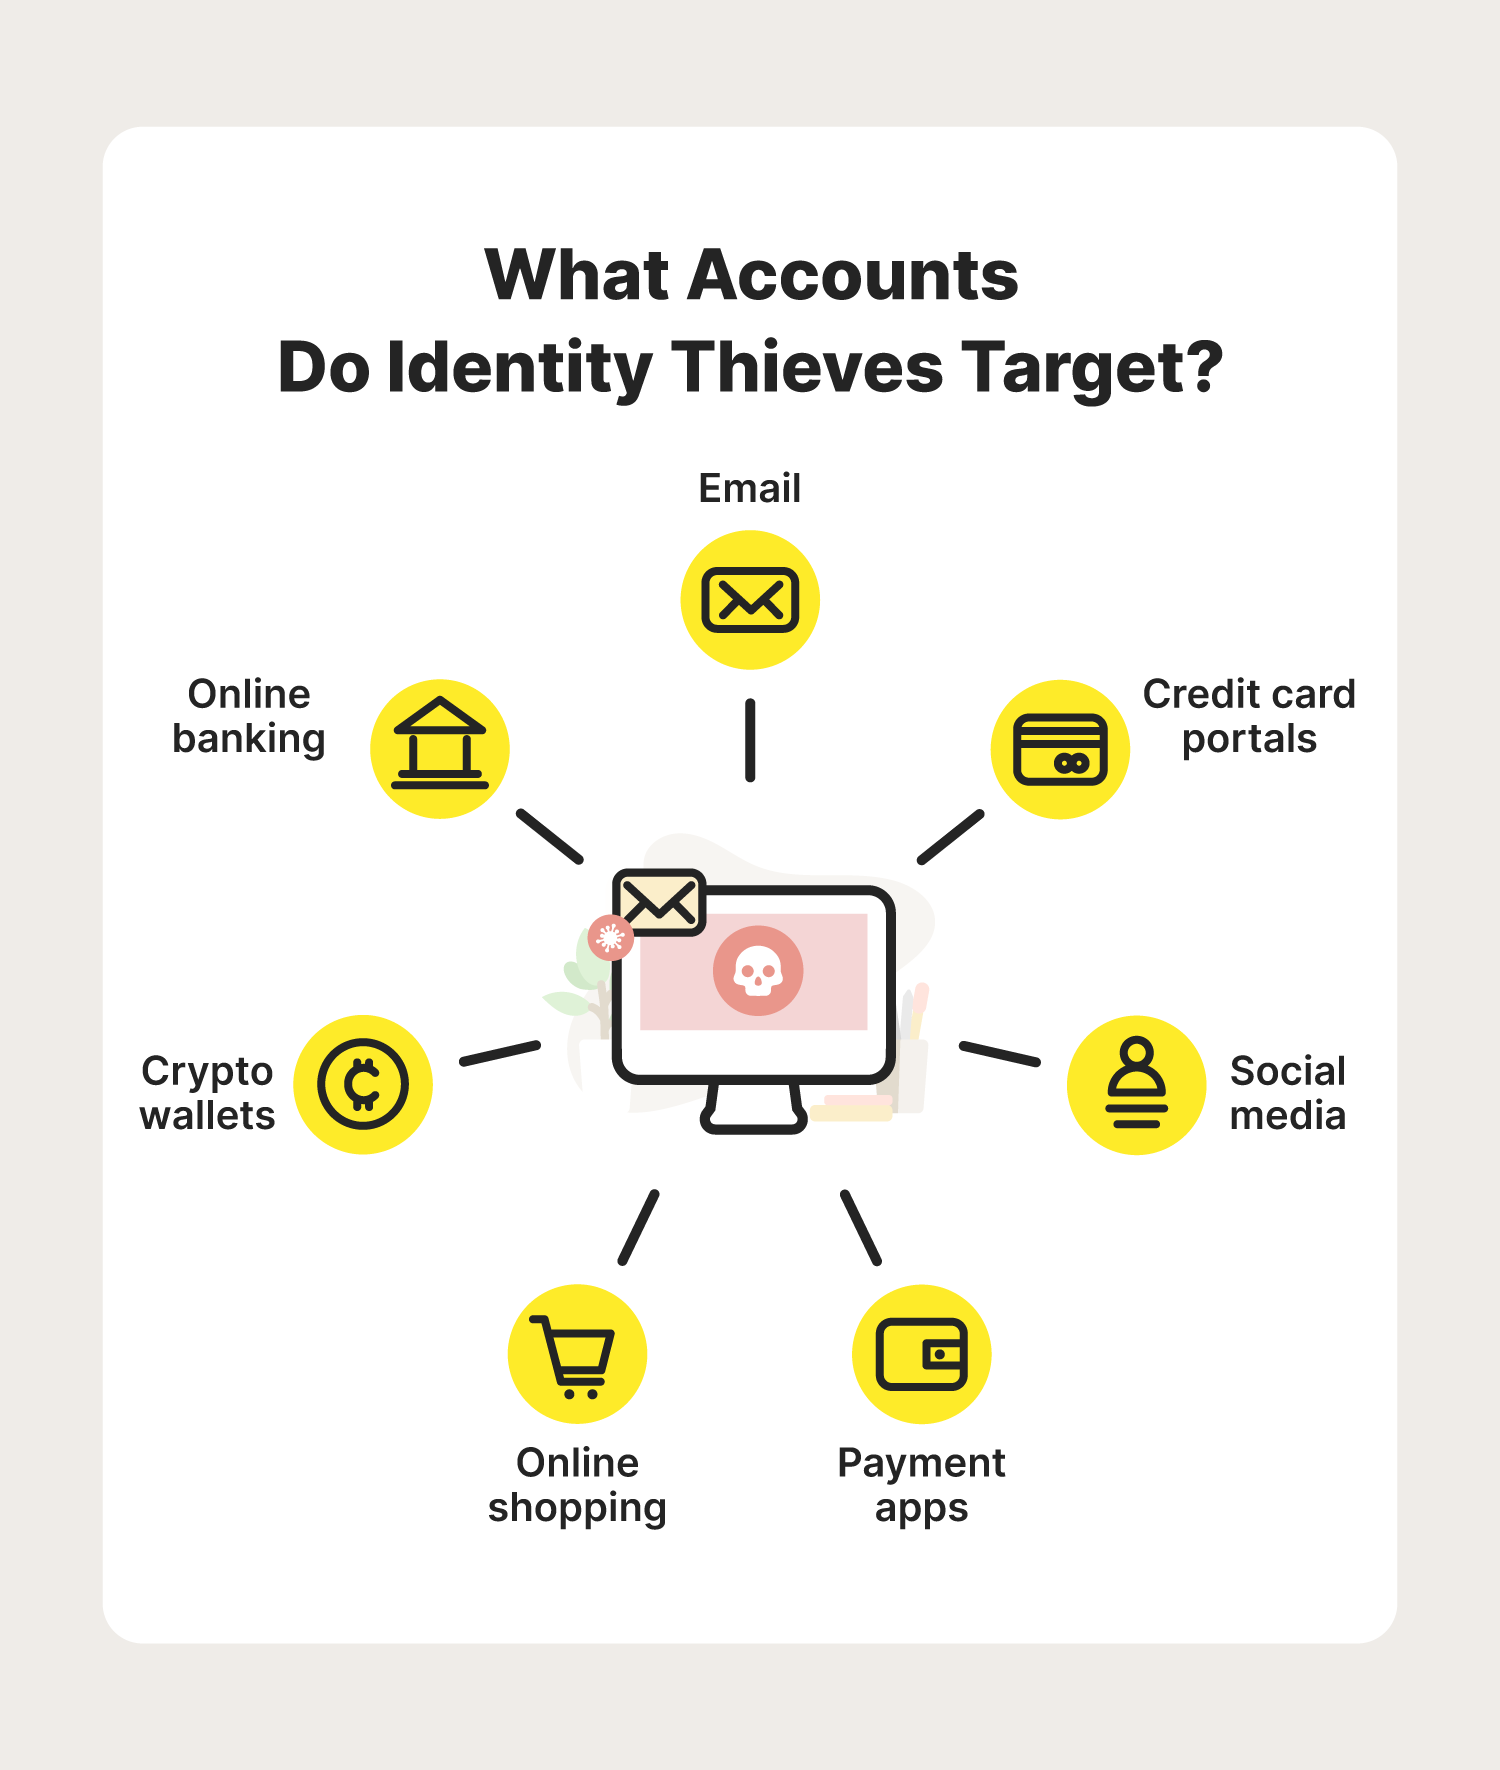 A graphic illustrates the accounts often targeted by identity thieves in an account takeover, one of the popular types of identity theft.